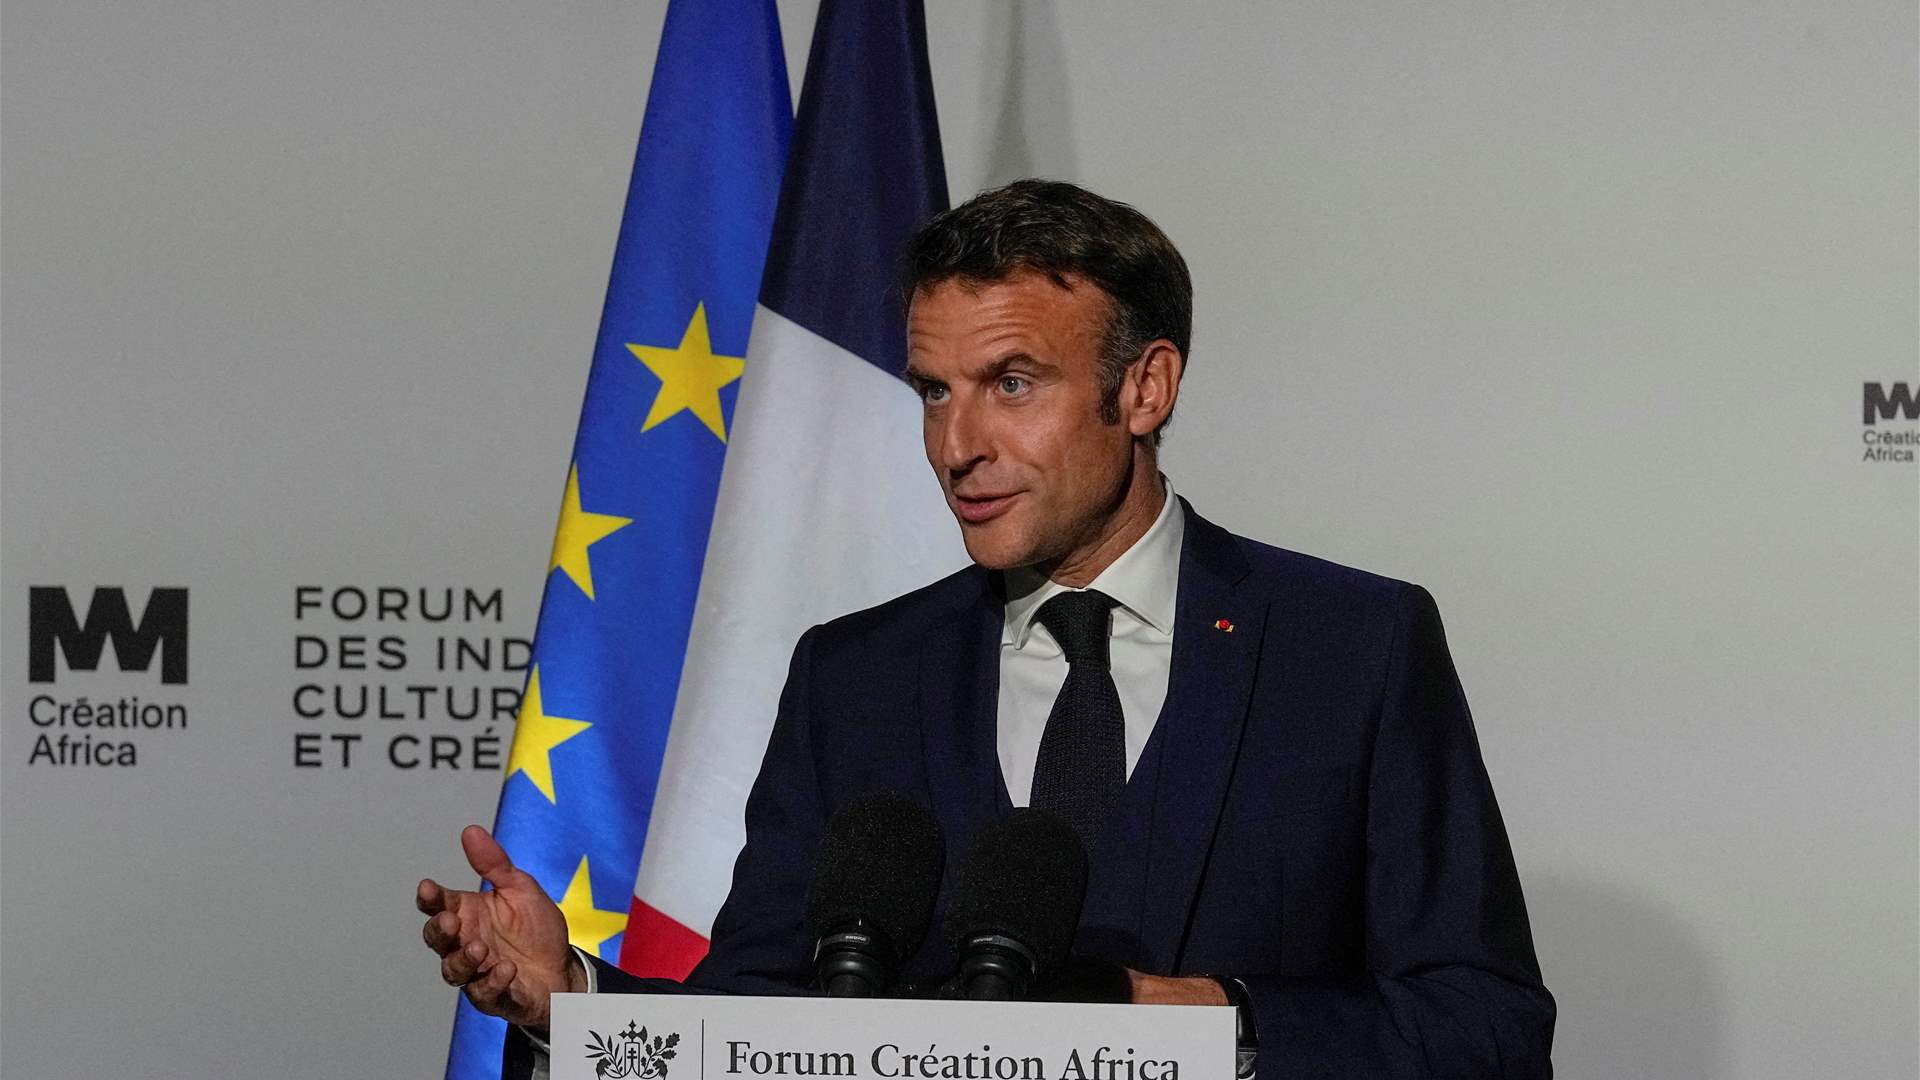 Macron: We must avoid escalation in the Middle East